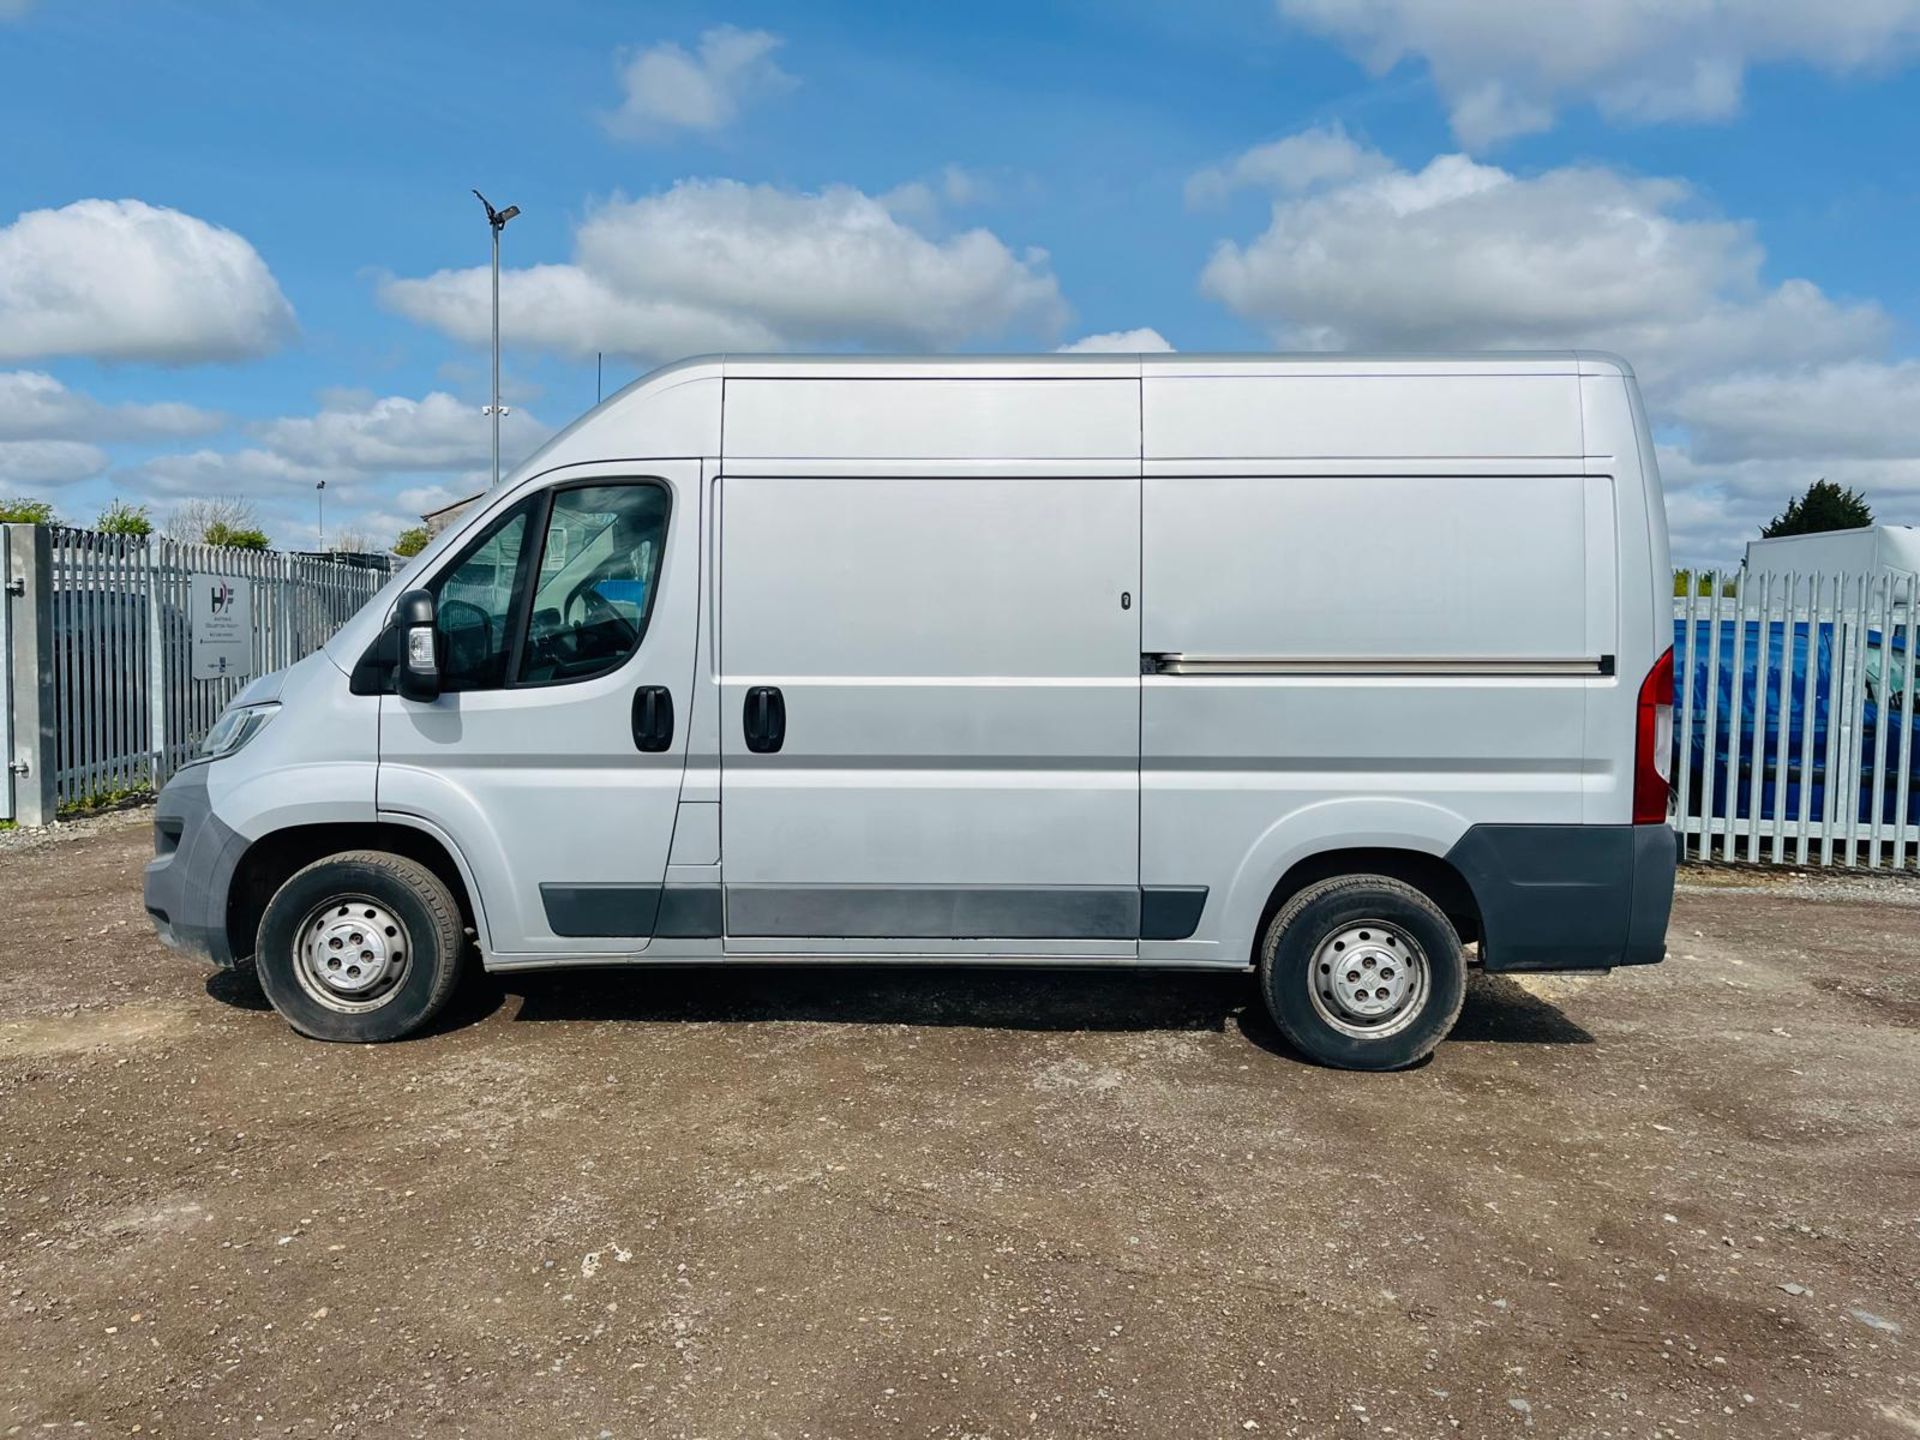 ** ON SALE ** Citroen Relay 2.2 HDI 130 Enterprise L2 H2 2.2 2015 '15 Reg' -A/C- Plylined- Bluetooth - Image 4 of 29